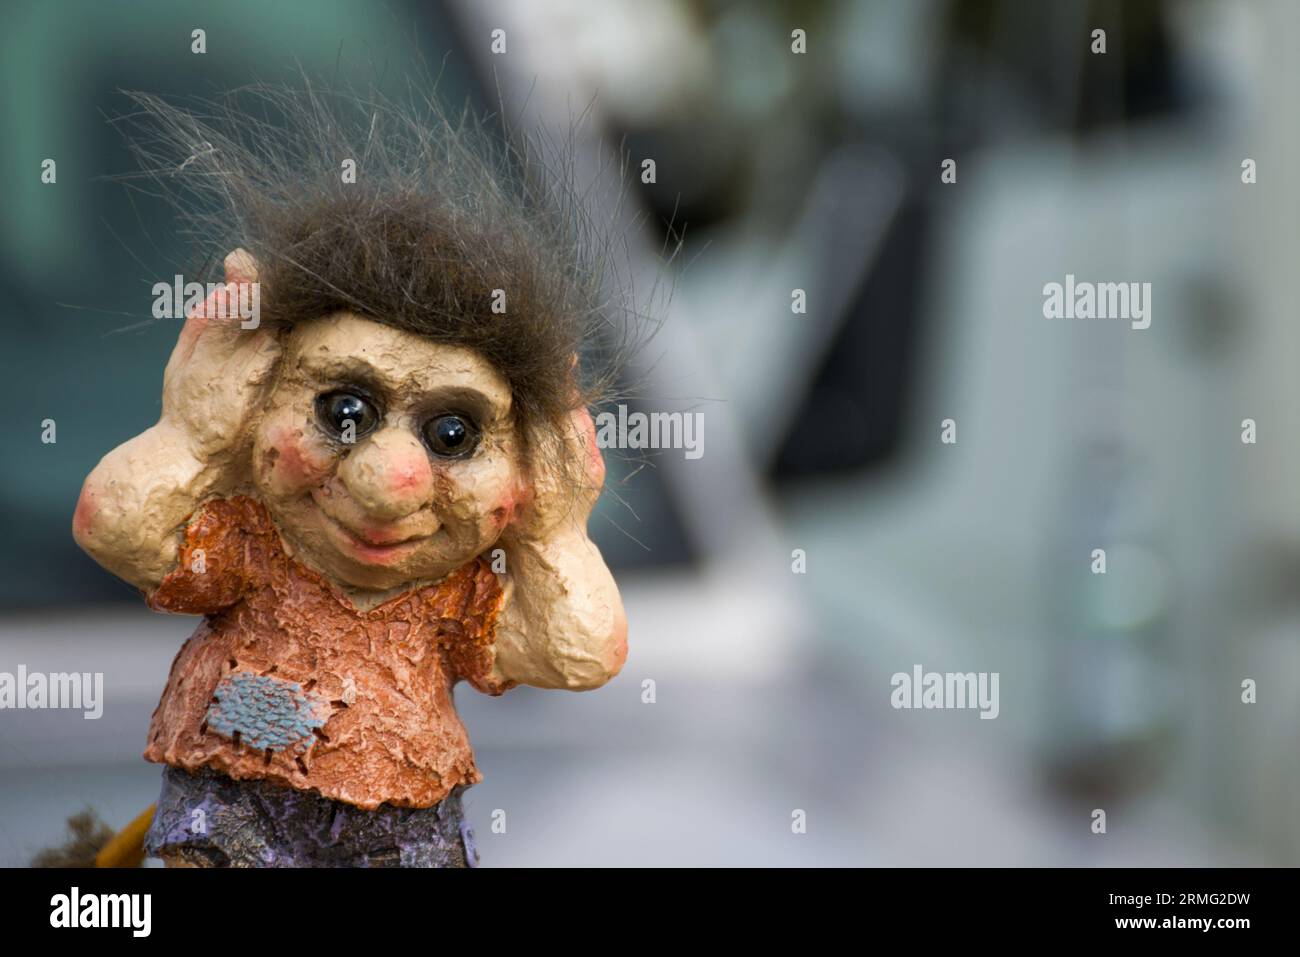 A small Norwegian troll covering his eares. Trolls are famous creatures in Scandinavian myth. Very detailed image with copyspace. Stock Photo